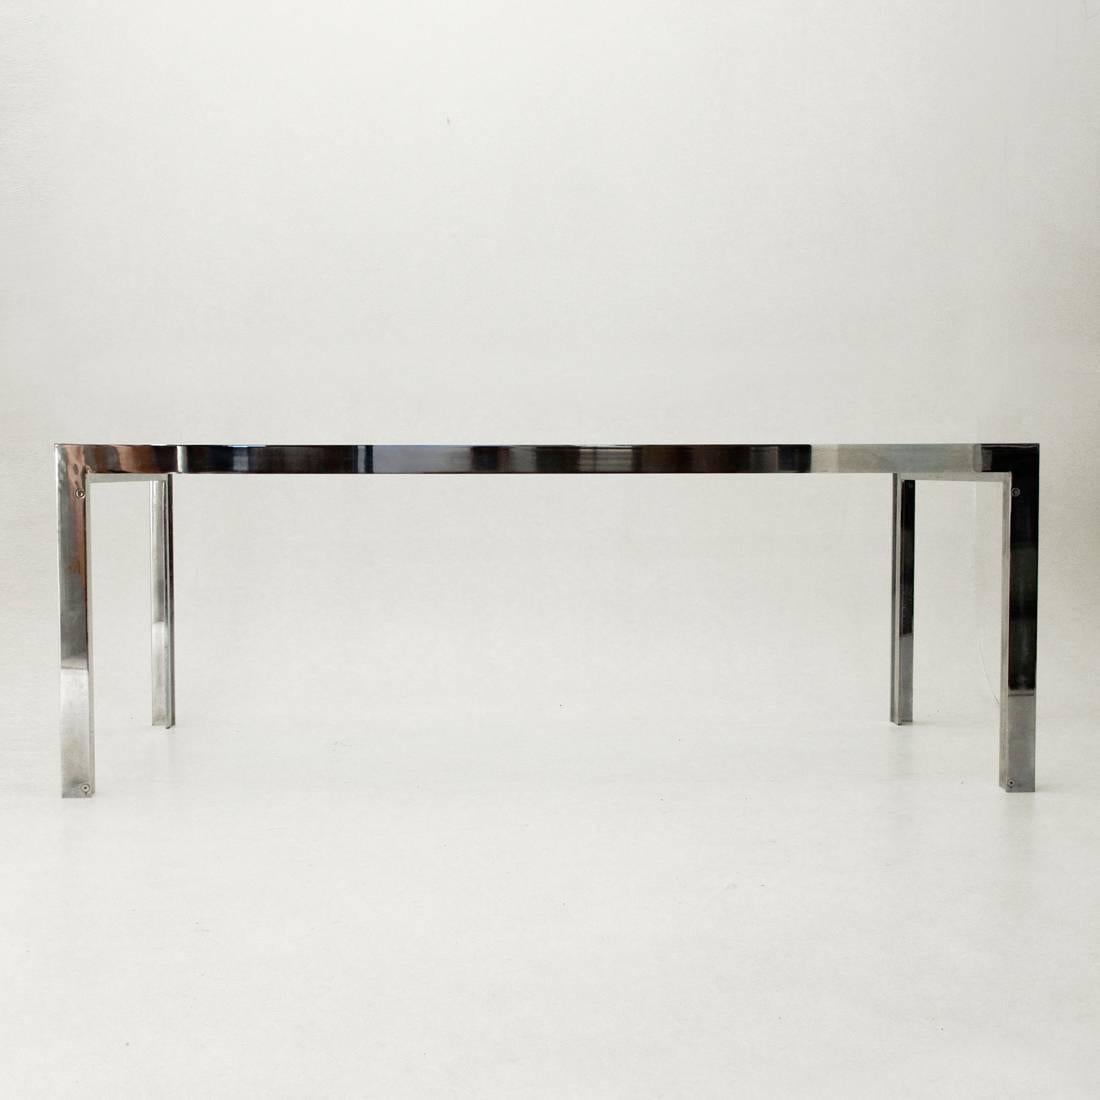 Impressive dining table produced in the 1970s.
Chromium-plated steel structure, high thickness of glass.
Good condition, small snap in a corner of the glass.
Dimensions: Width 200 cm, depth 102 cm, height 73 cm.